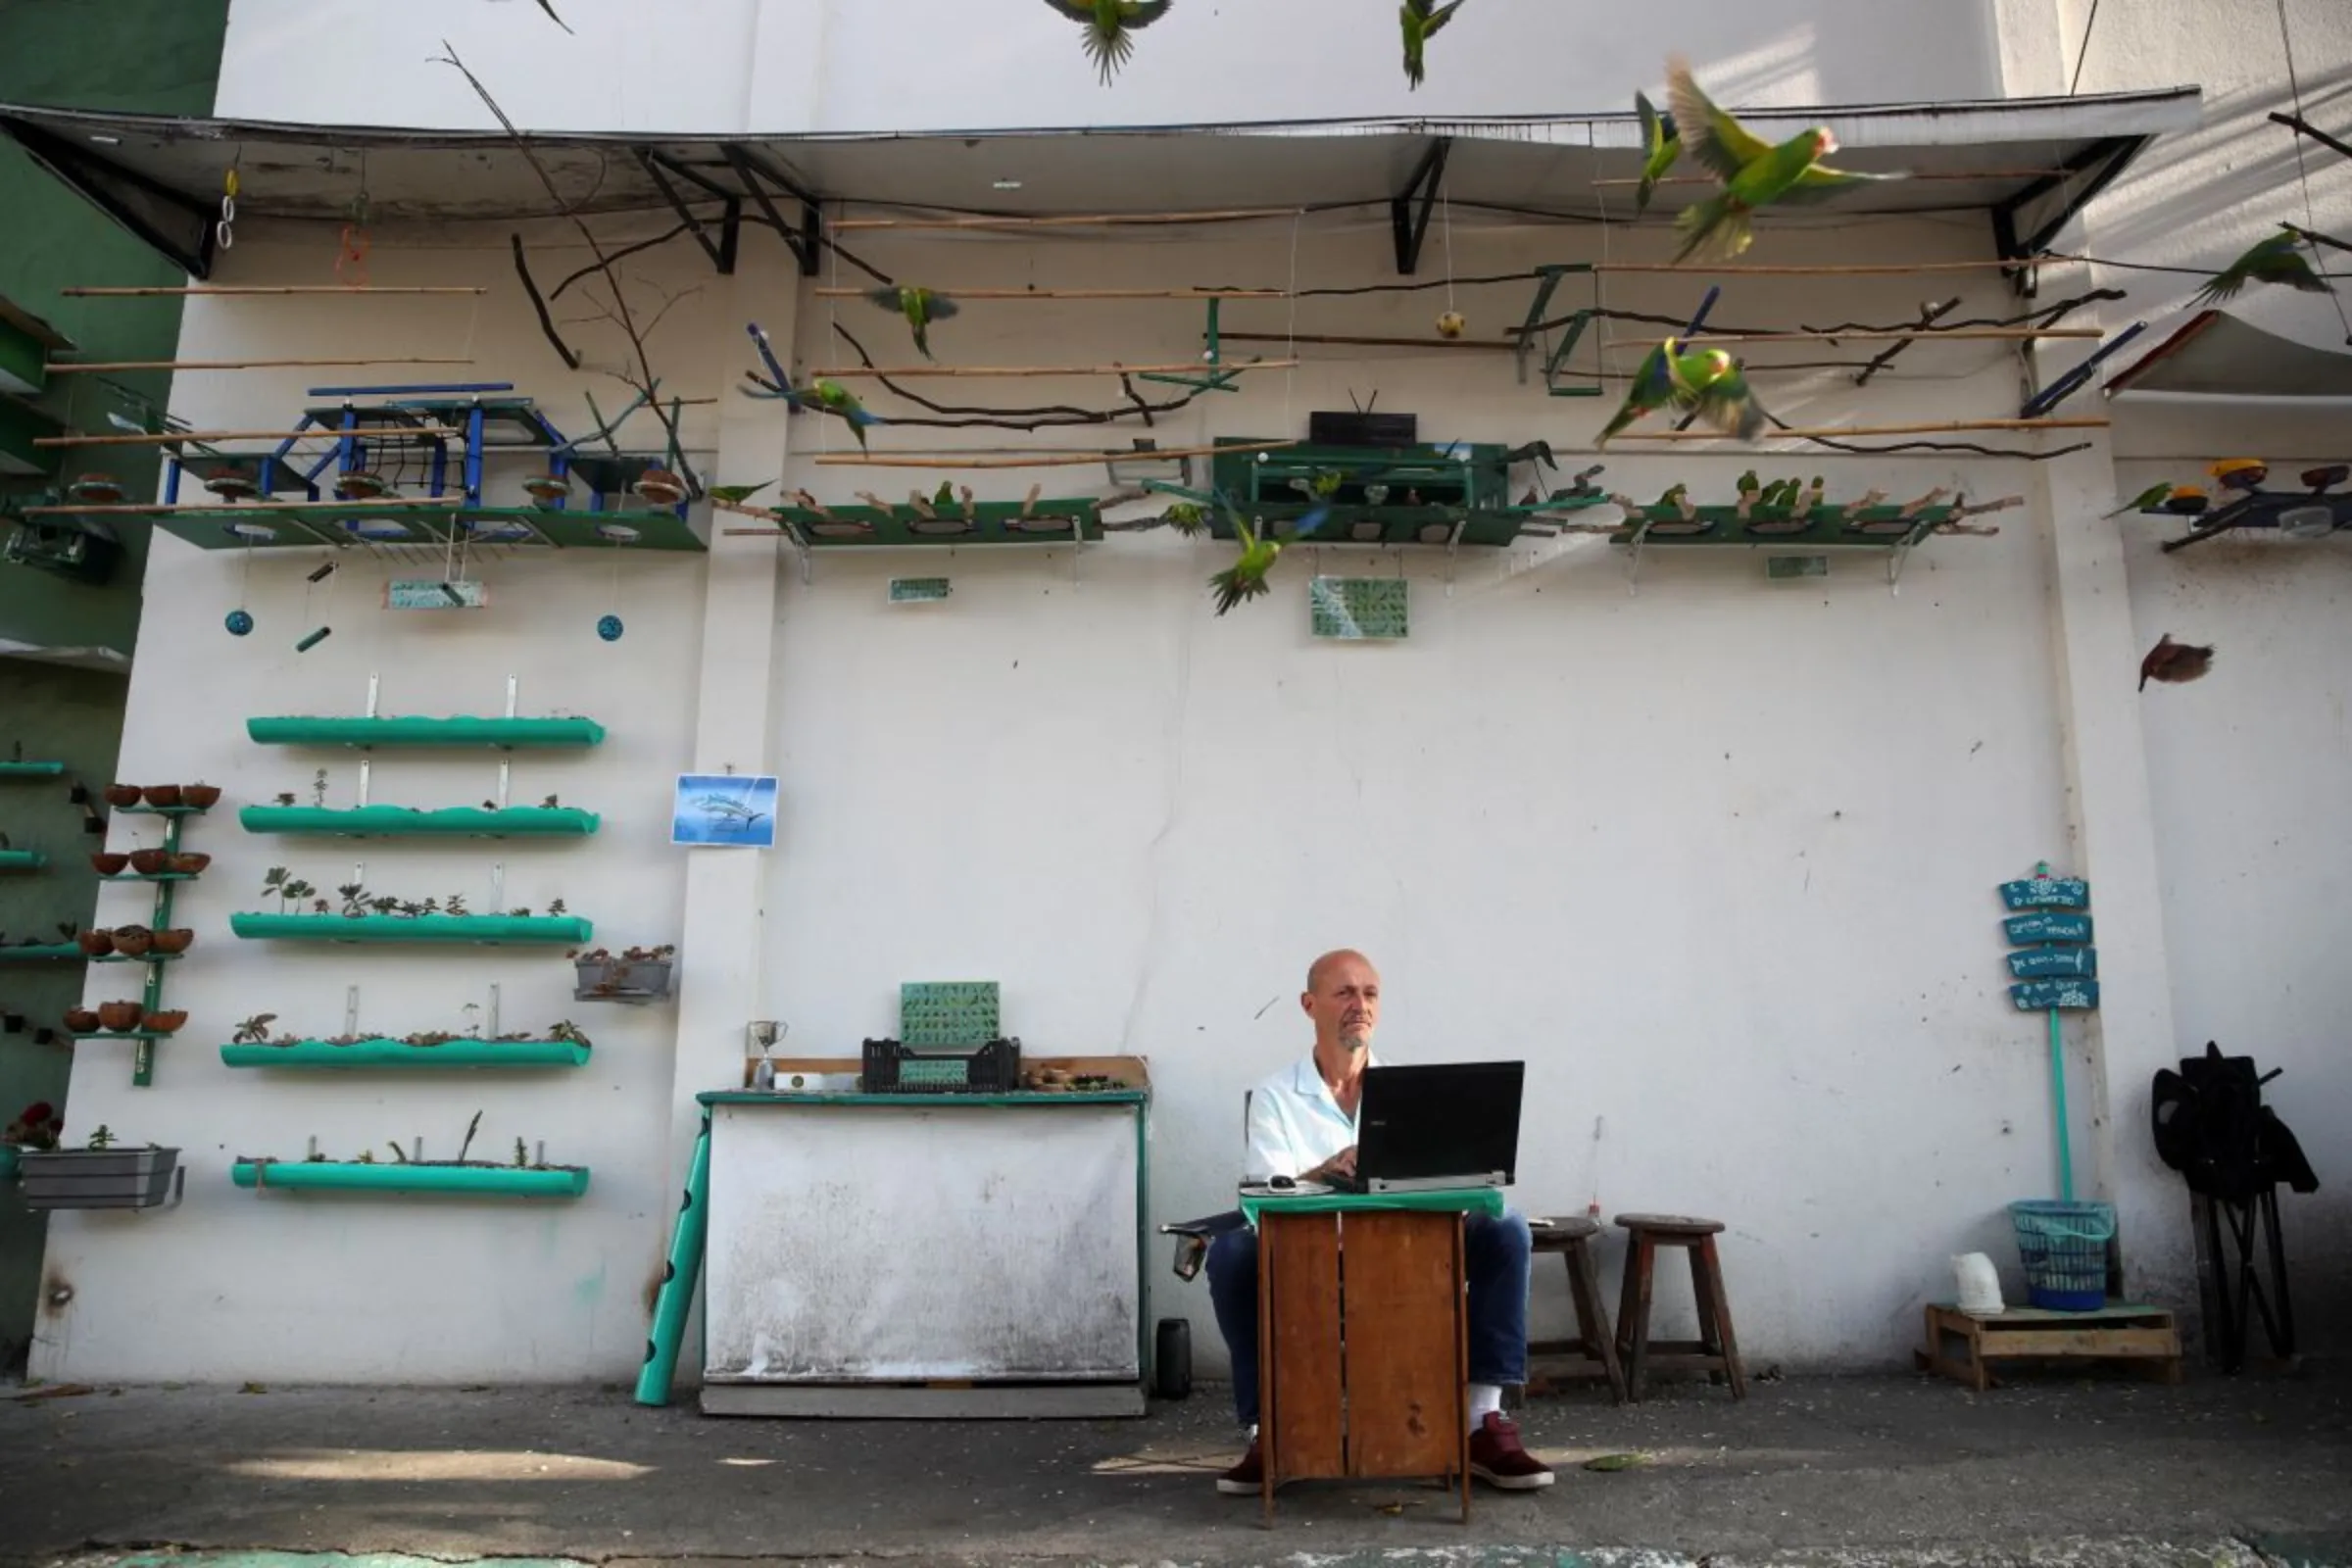 A man looks on while sitting on the sidewalk with his computer as birds fly near him in Sao Paulo, Brazil June 30, 2022